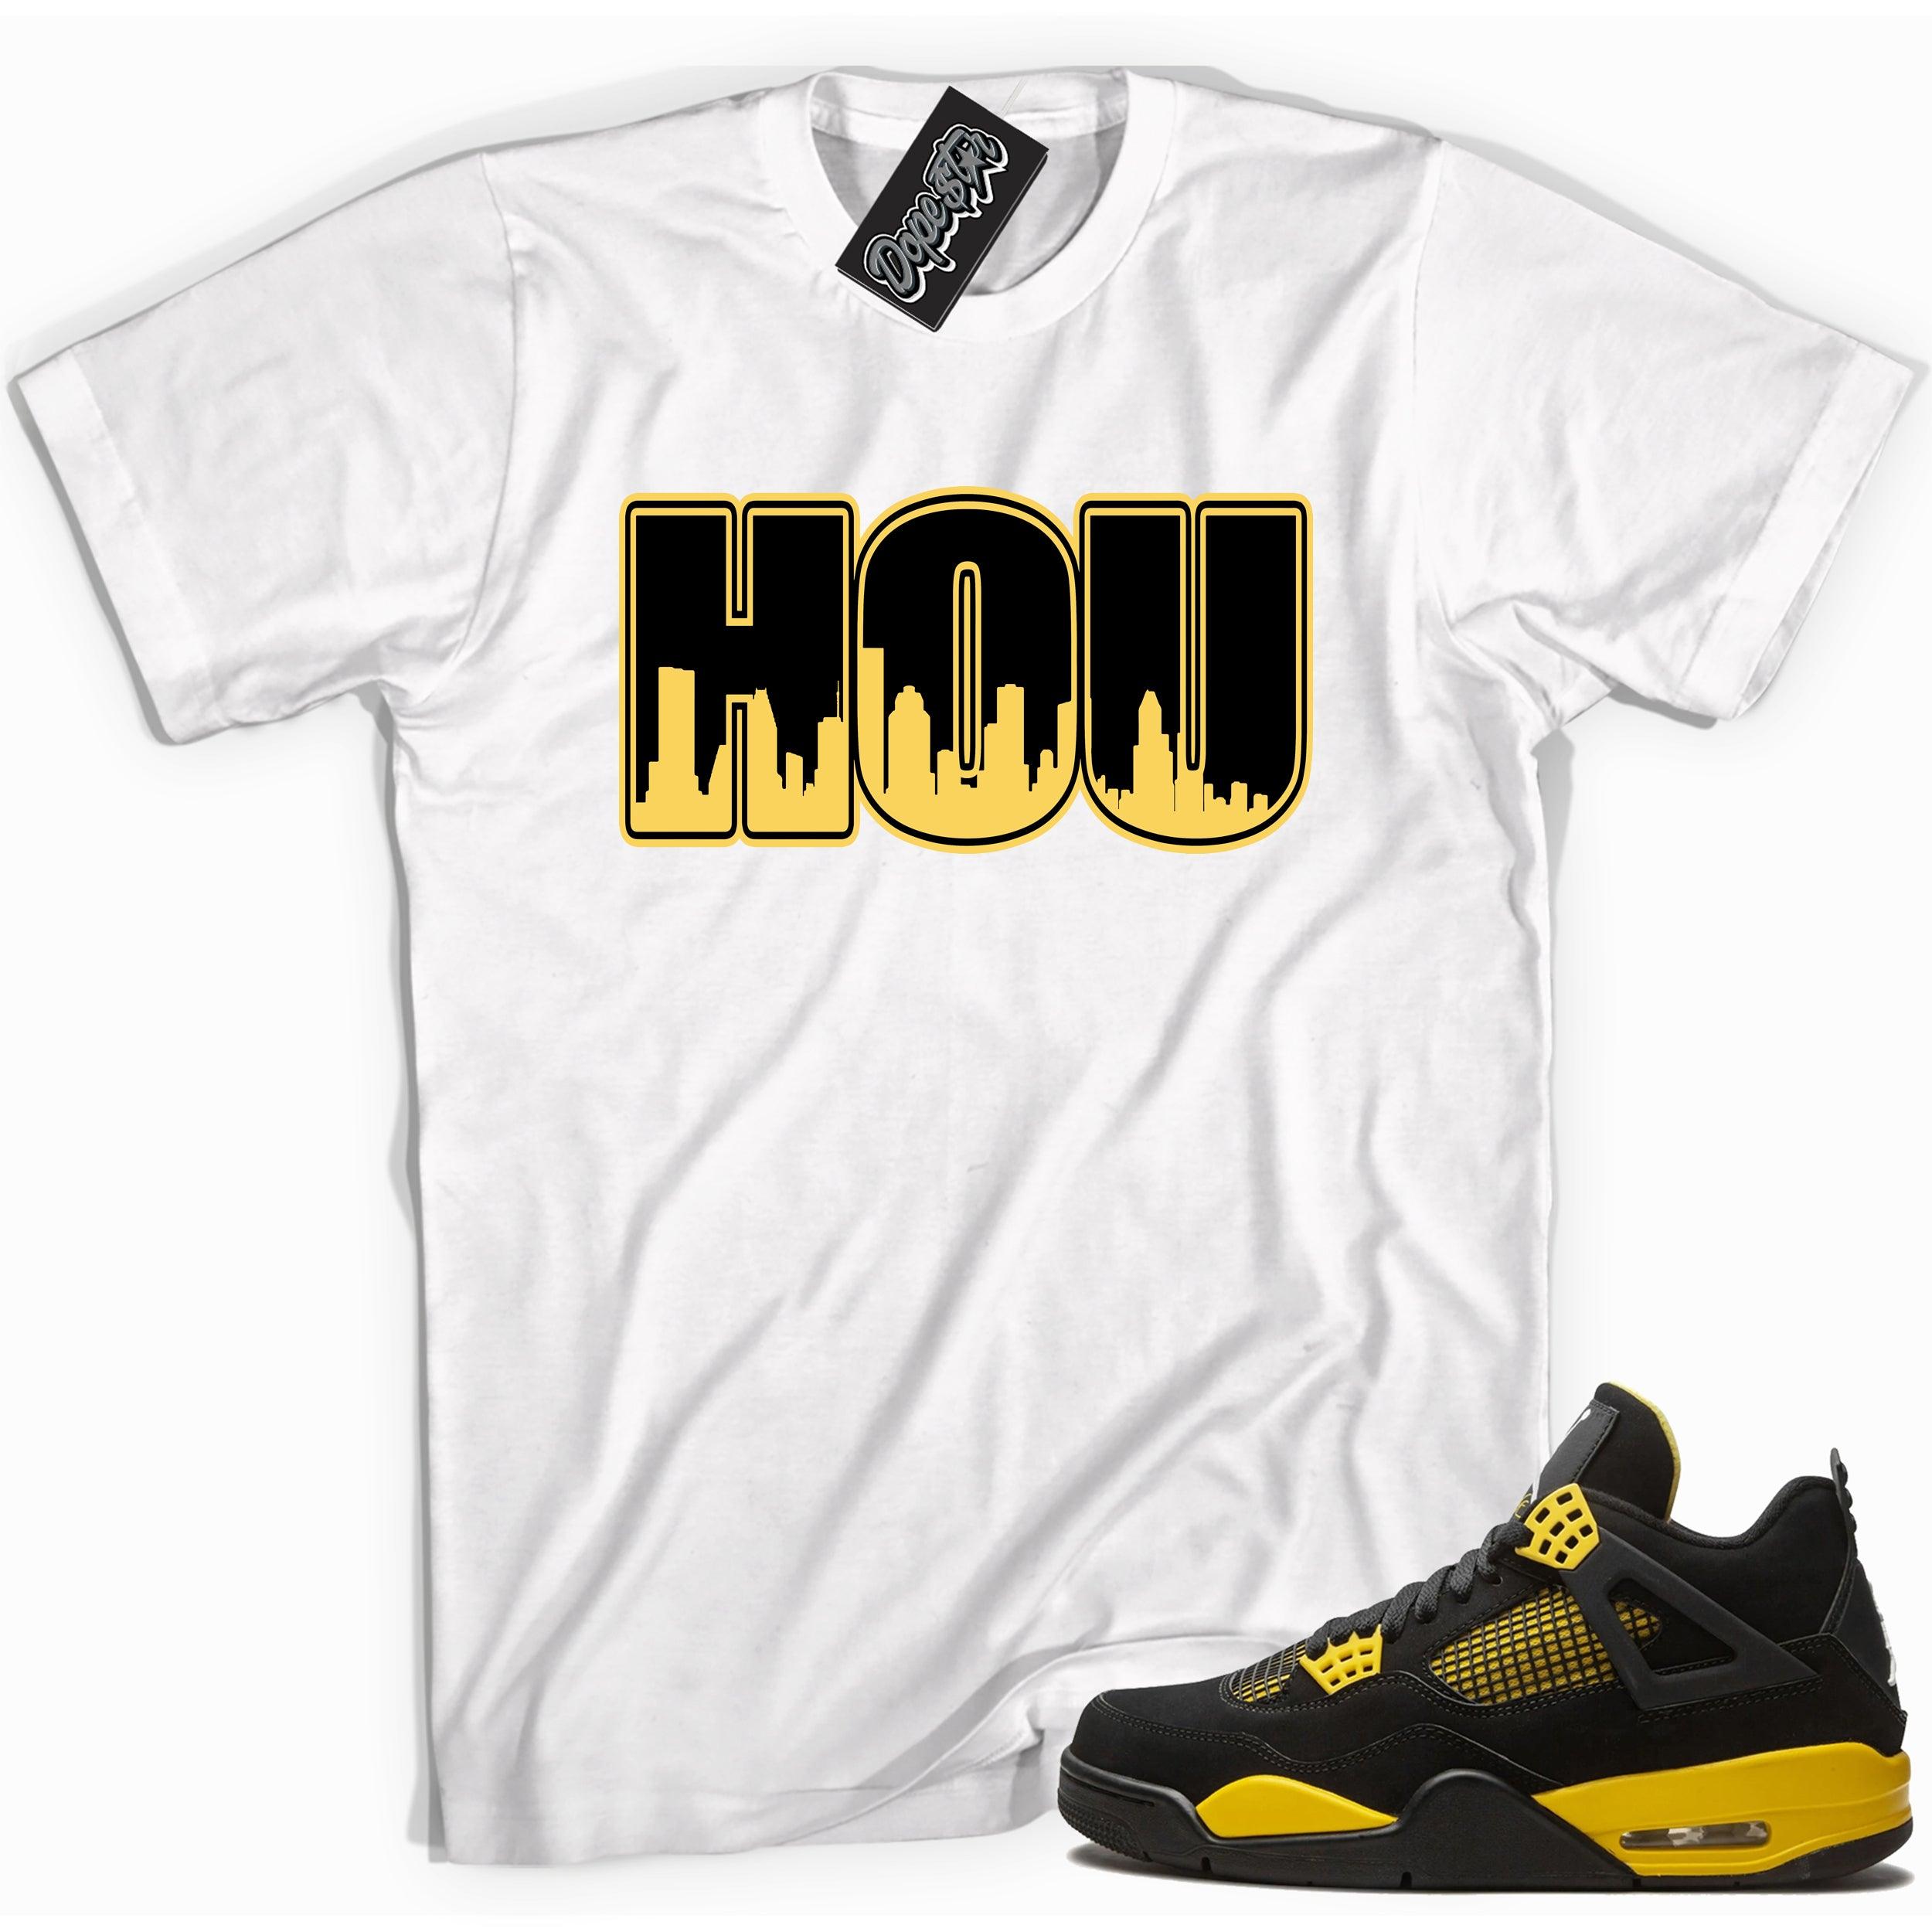 Cool white graphic tee with 'HOU' print, that perfectly matches Air Jordan 4 Thunder sneakers